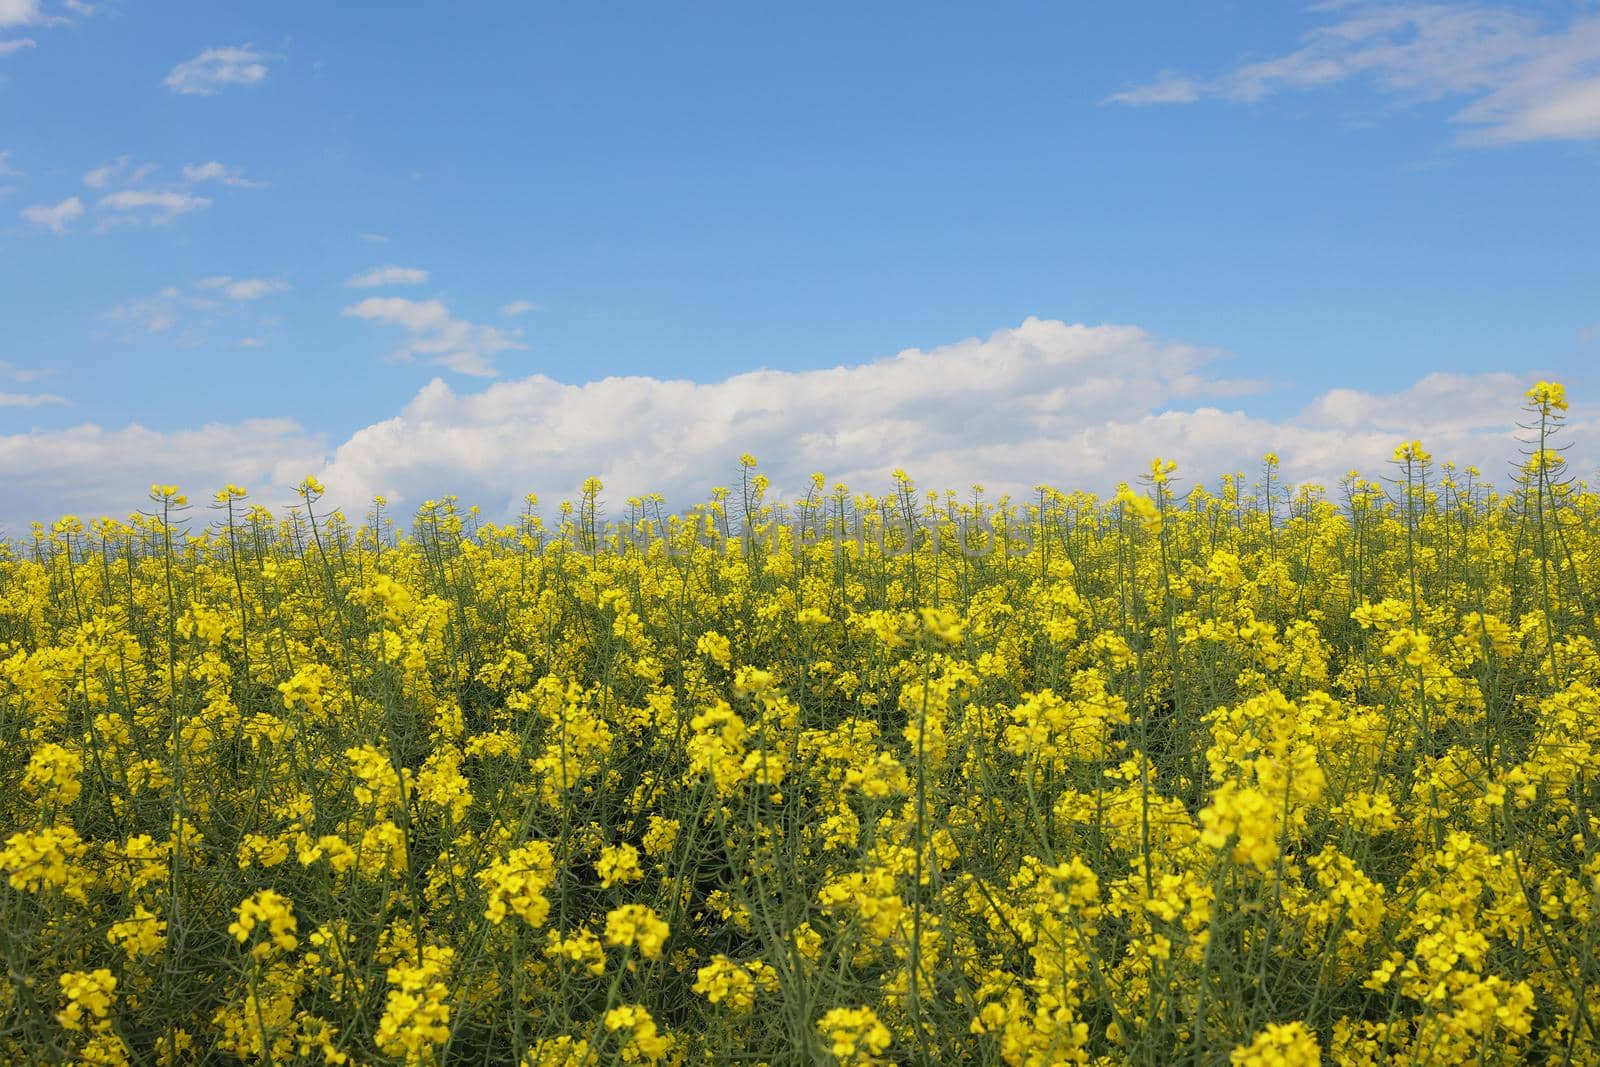 Wide angle view of a big field wit rapeseed flower plants photographed against blue sky during a sunny day. Agriculture landscape and farming industry.